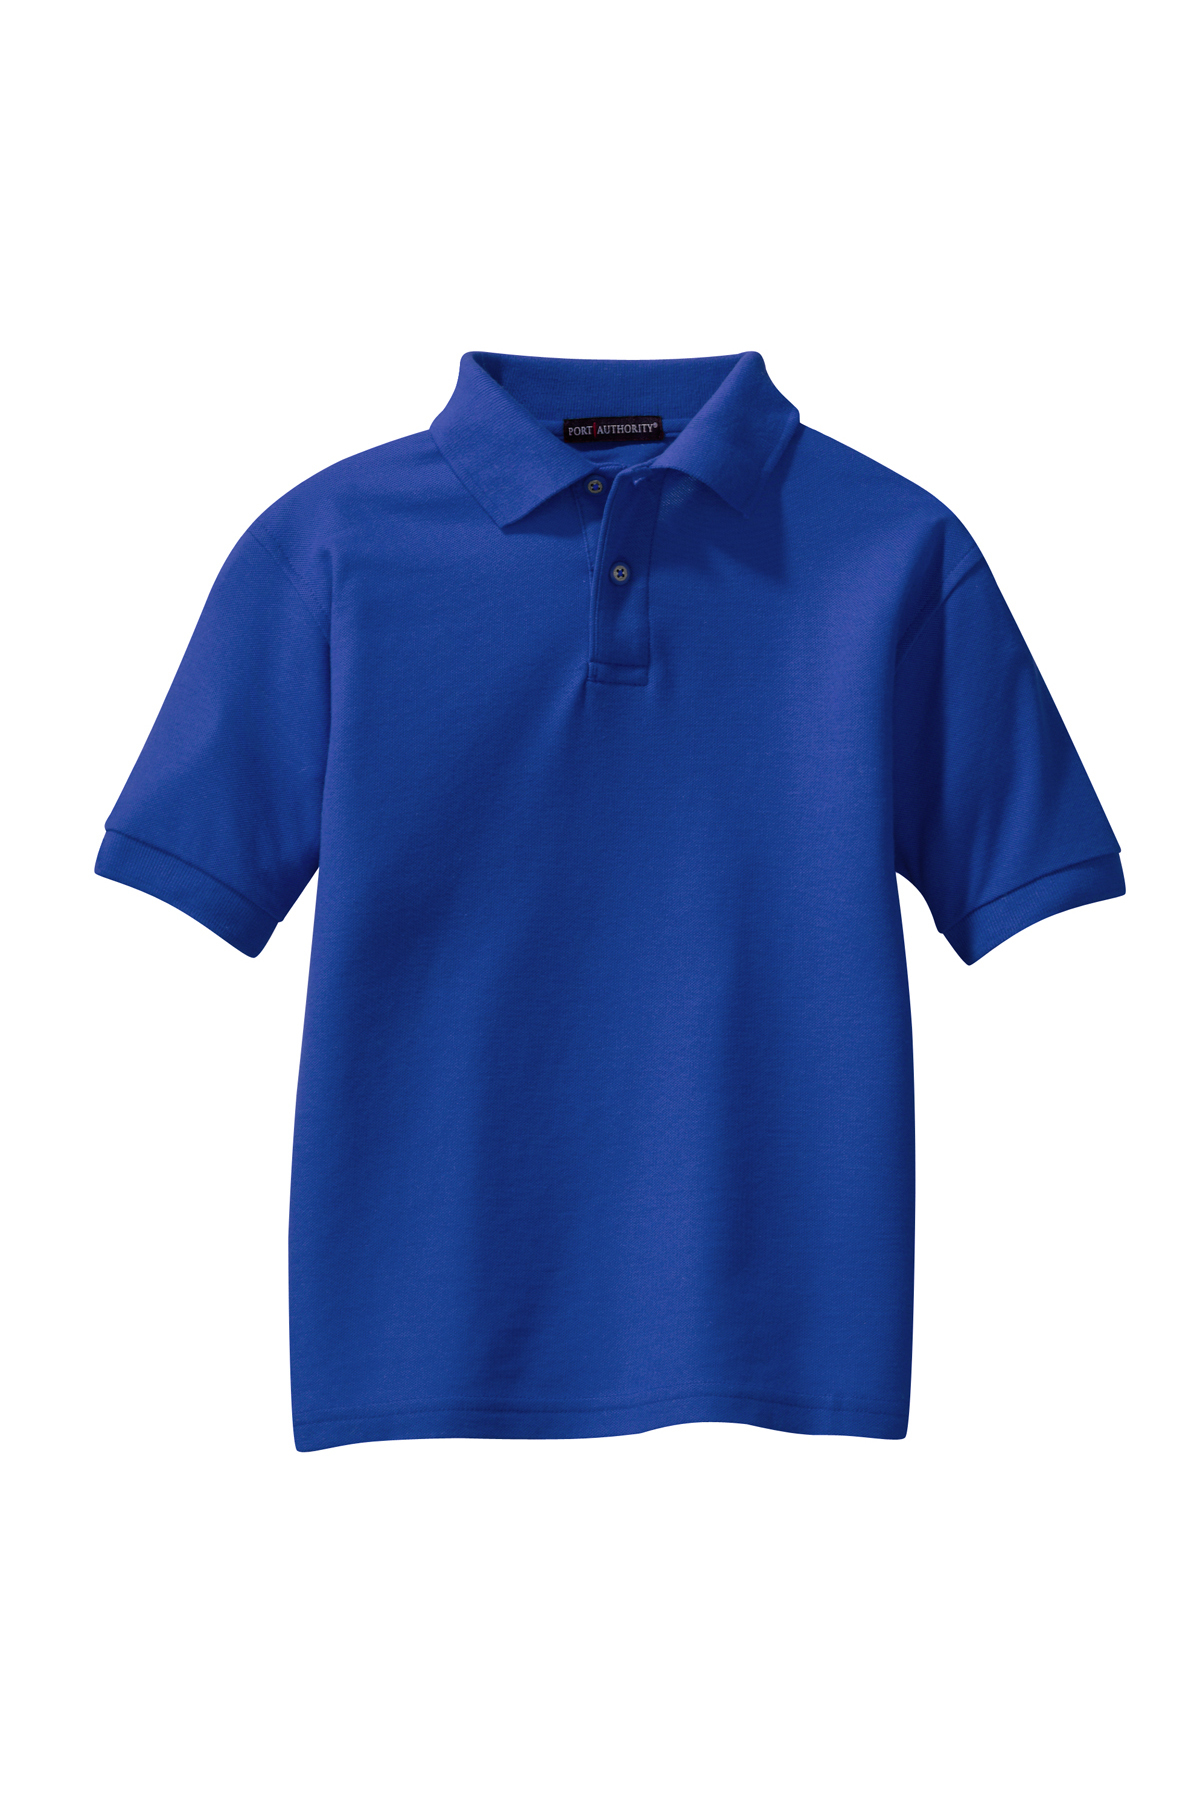 Port Authority Youth Silk Touch™ Polo | Product | Port Authority